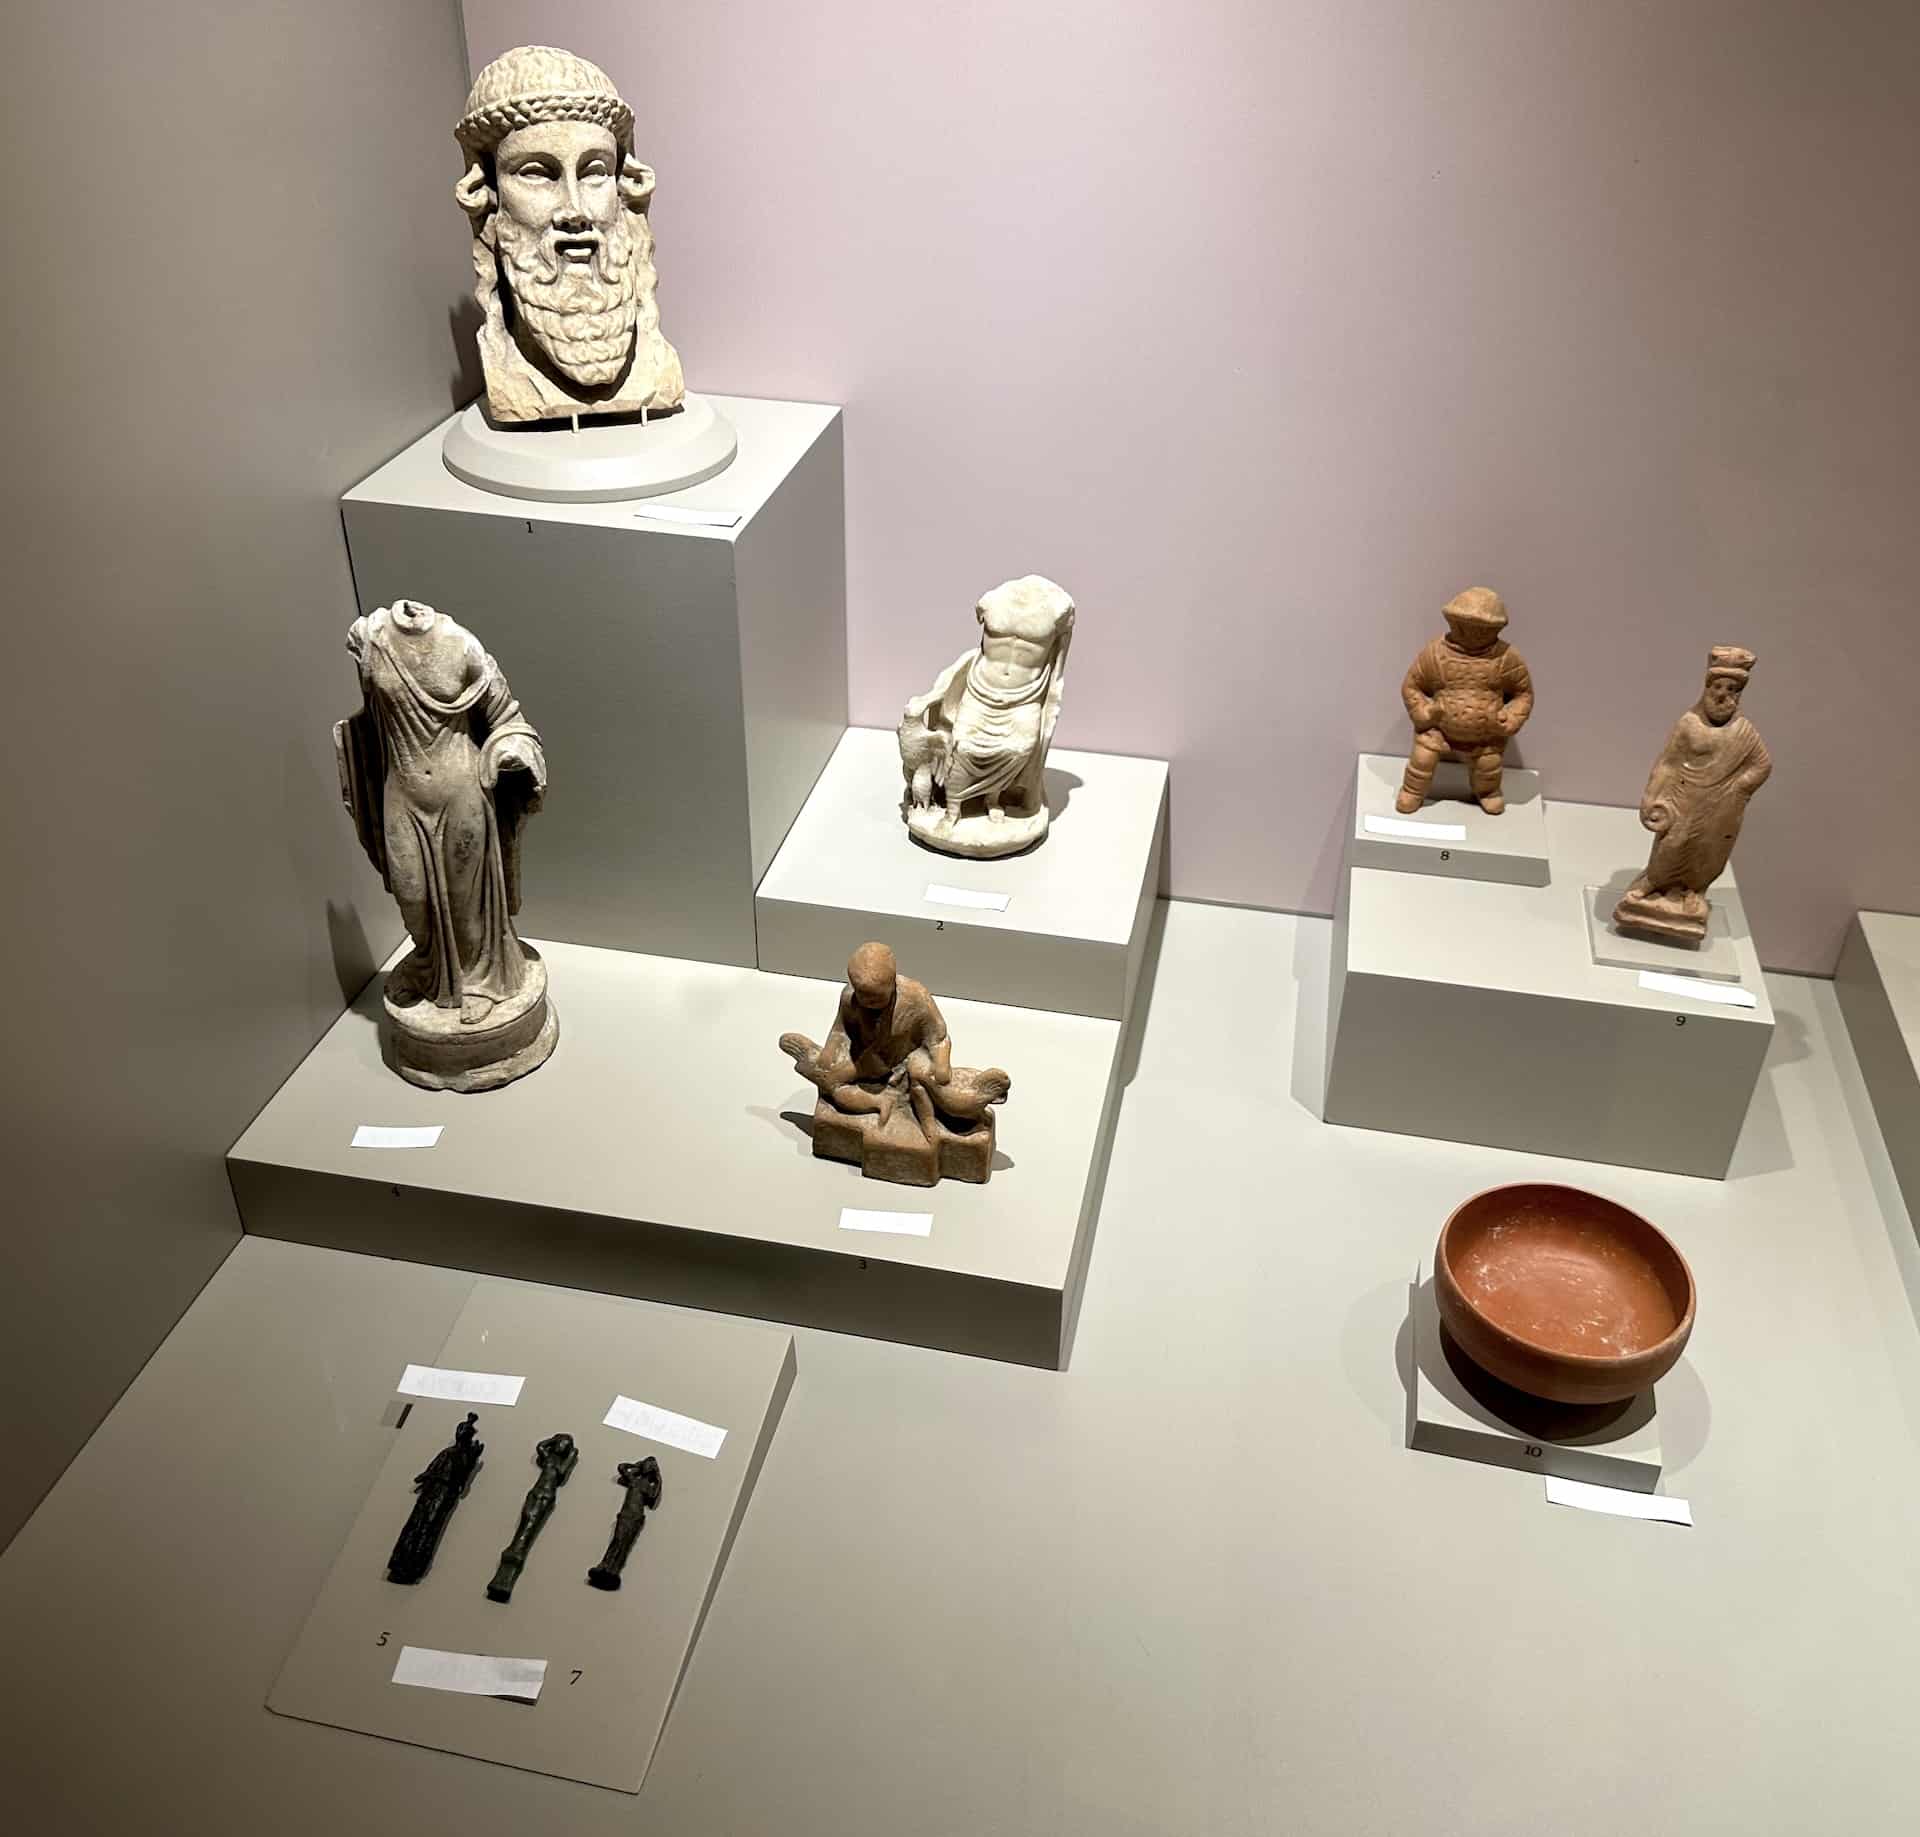 Figurines and votives (1st century BC to 3rd century AD) in Ephesus Through the Ages at the Ephesus Museum in Selçuk, Turkey